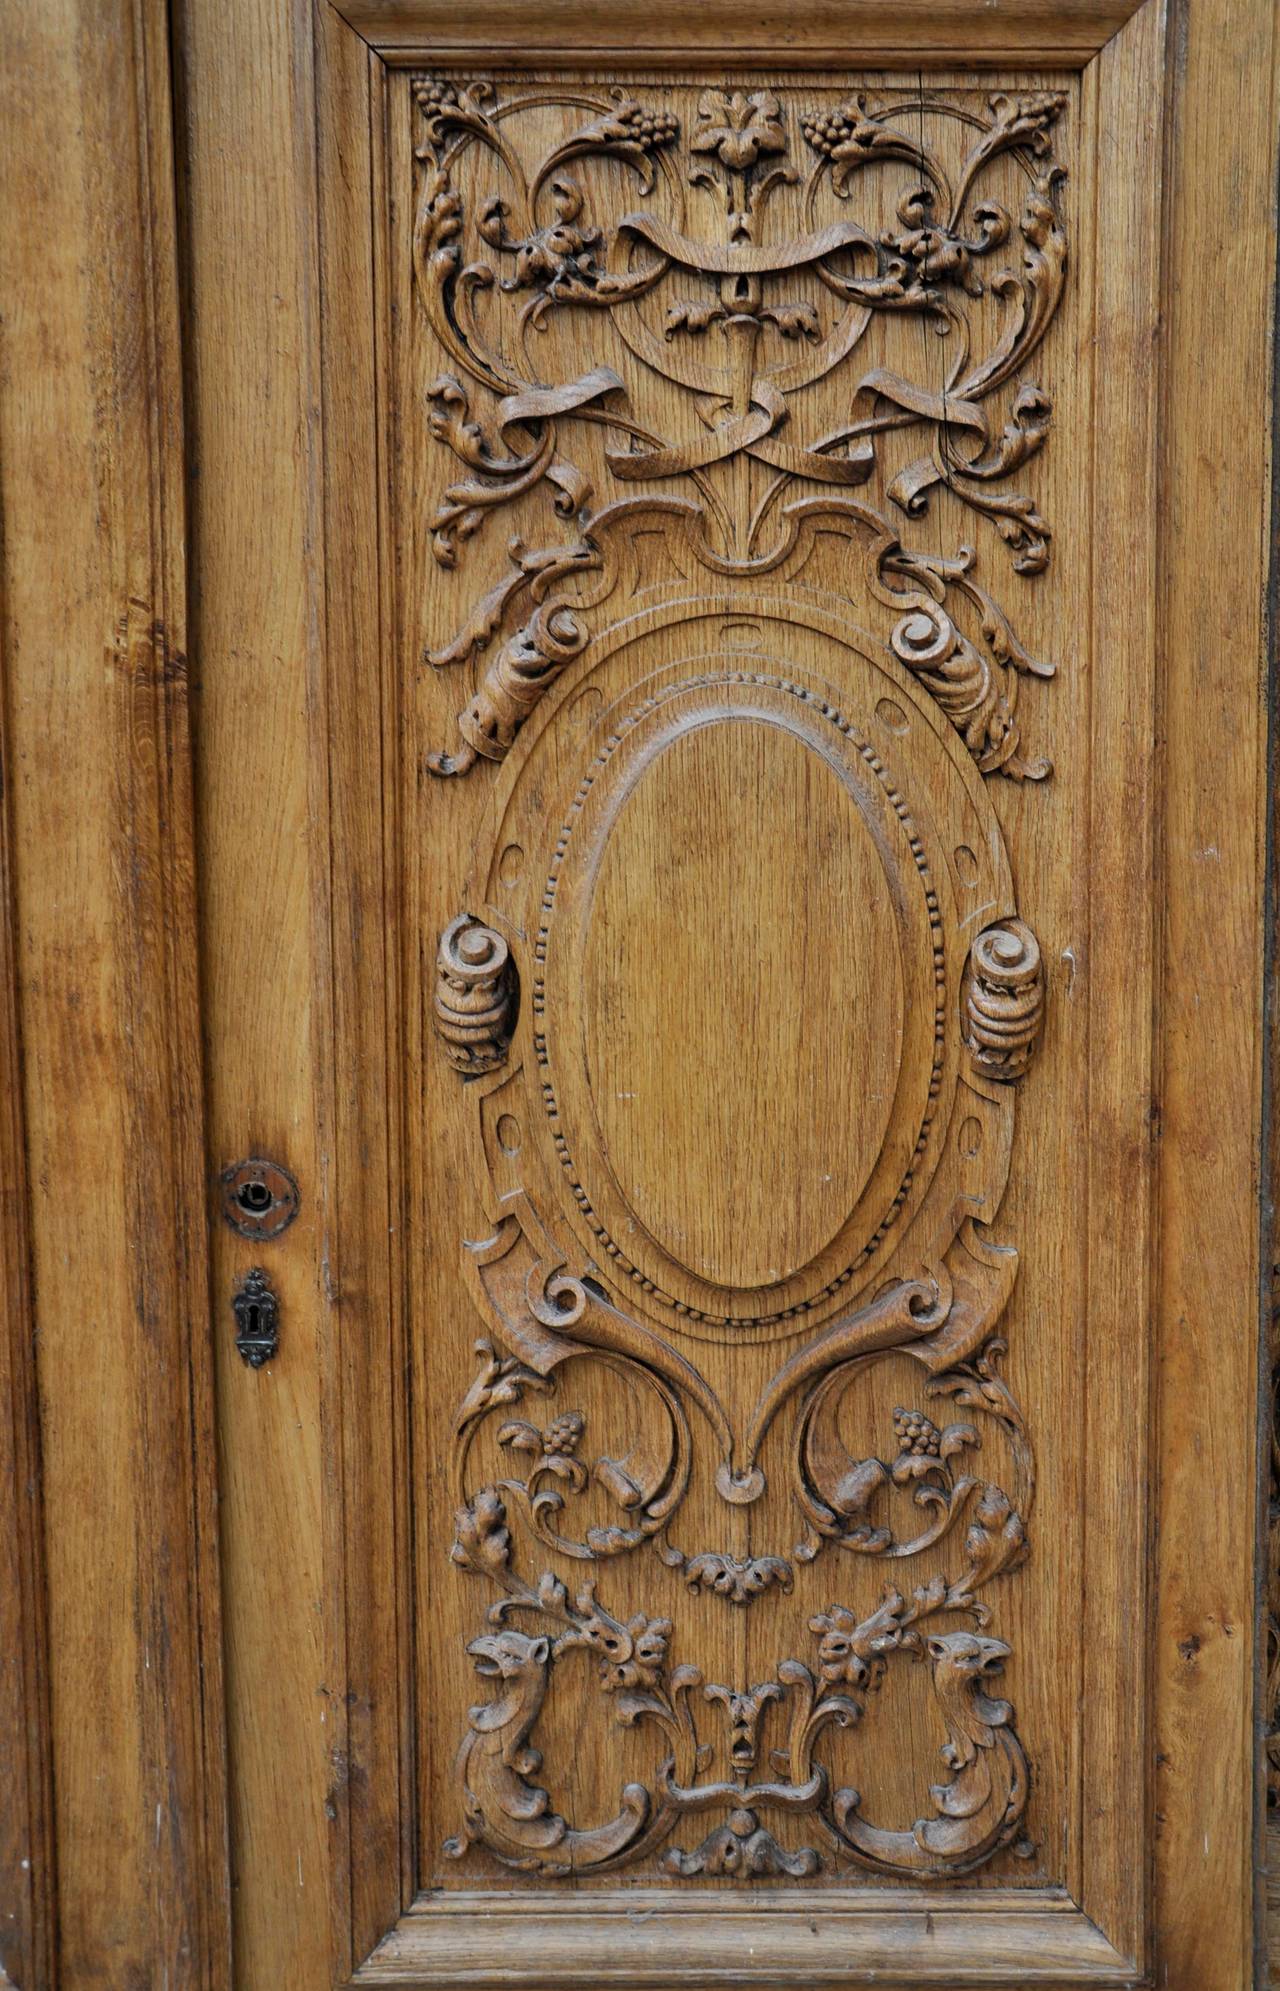 This pair of double doors was made out of carved oak wood during the 19th century. This decor of grotesques, foliages and chimeras is highly interesting. 
The handles and hinges are provided.
The back decor is made out of stucco.